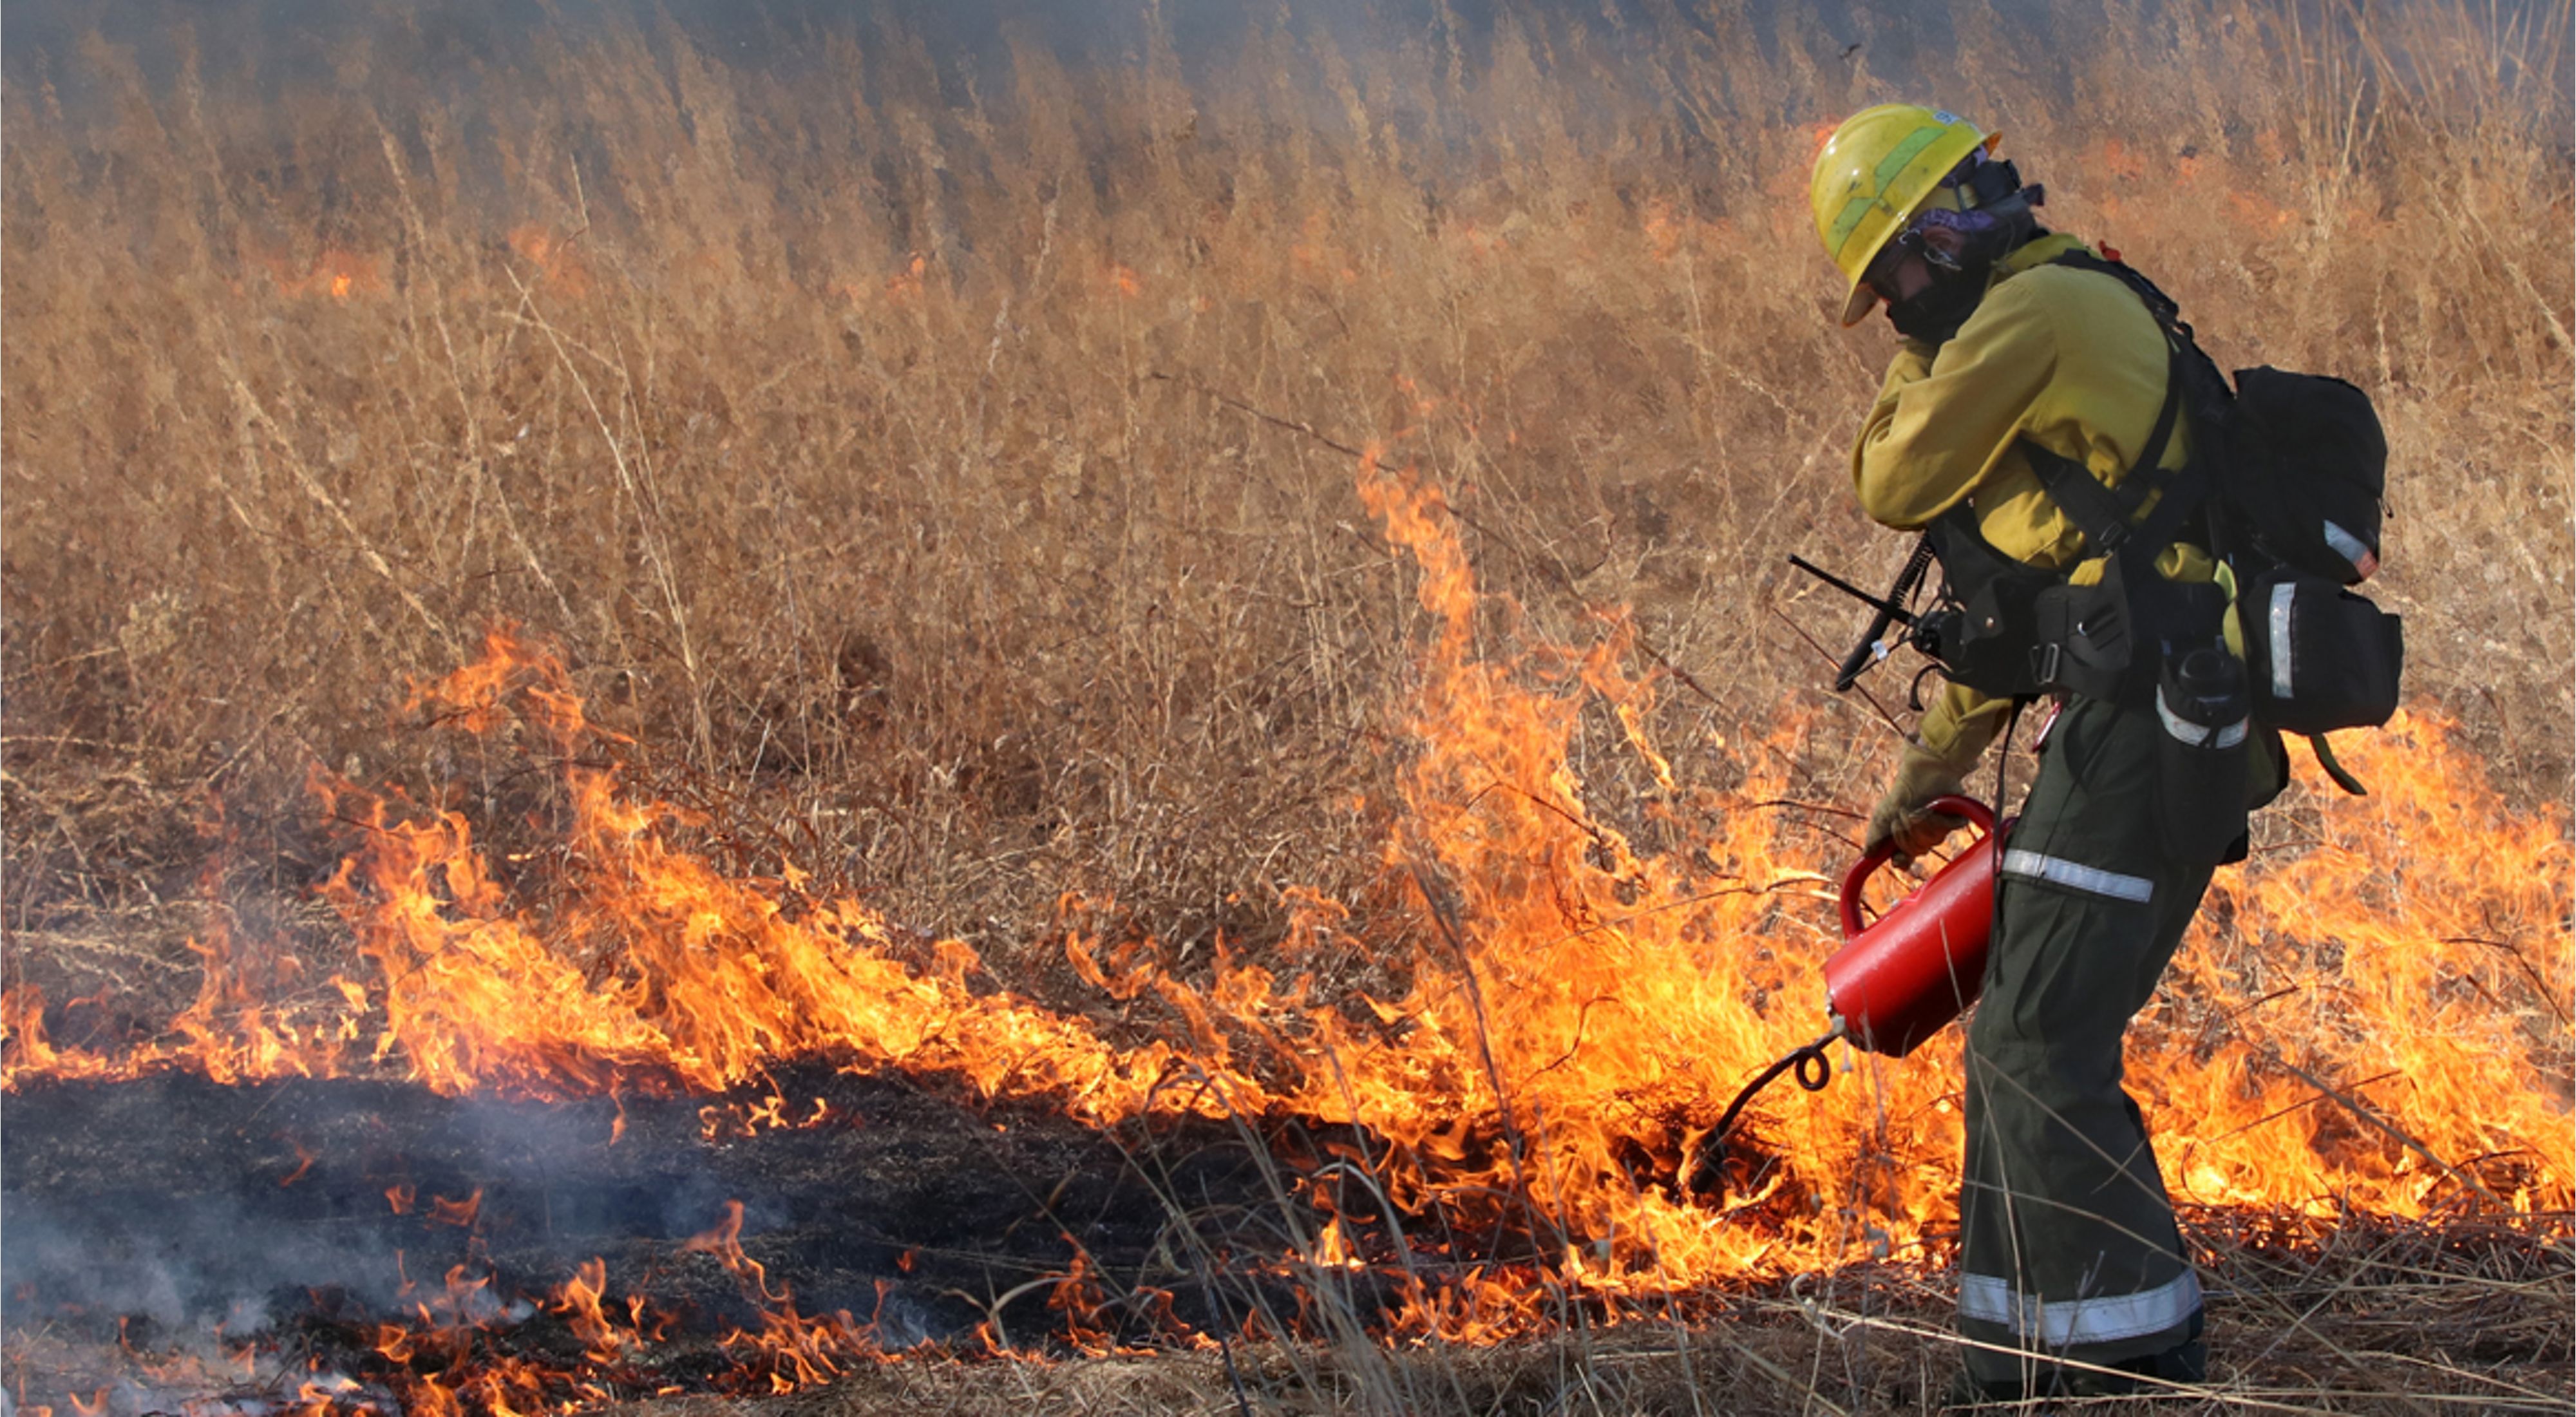 A woman dressed in yellow and green fire protective clothing, helmet, and other gear holds a red drip torch to a patch of dry brown grass that is in flames. 